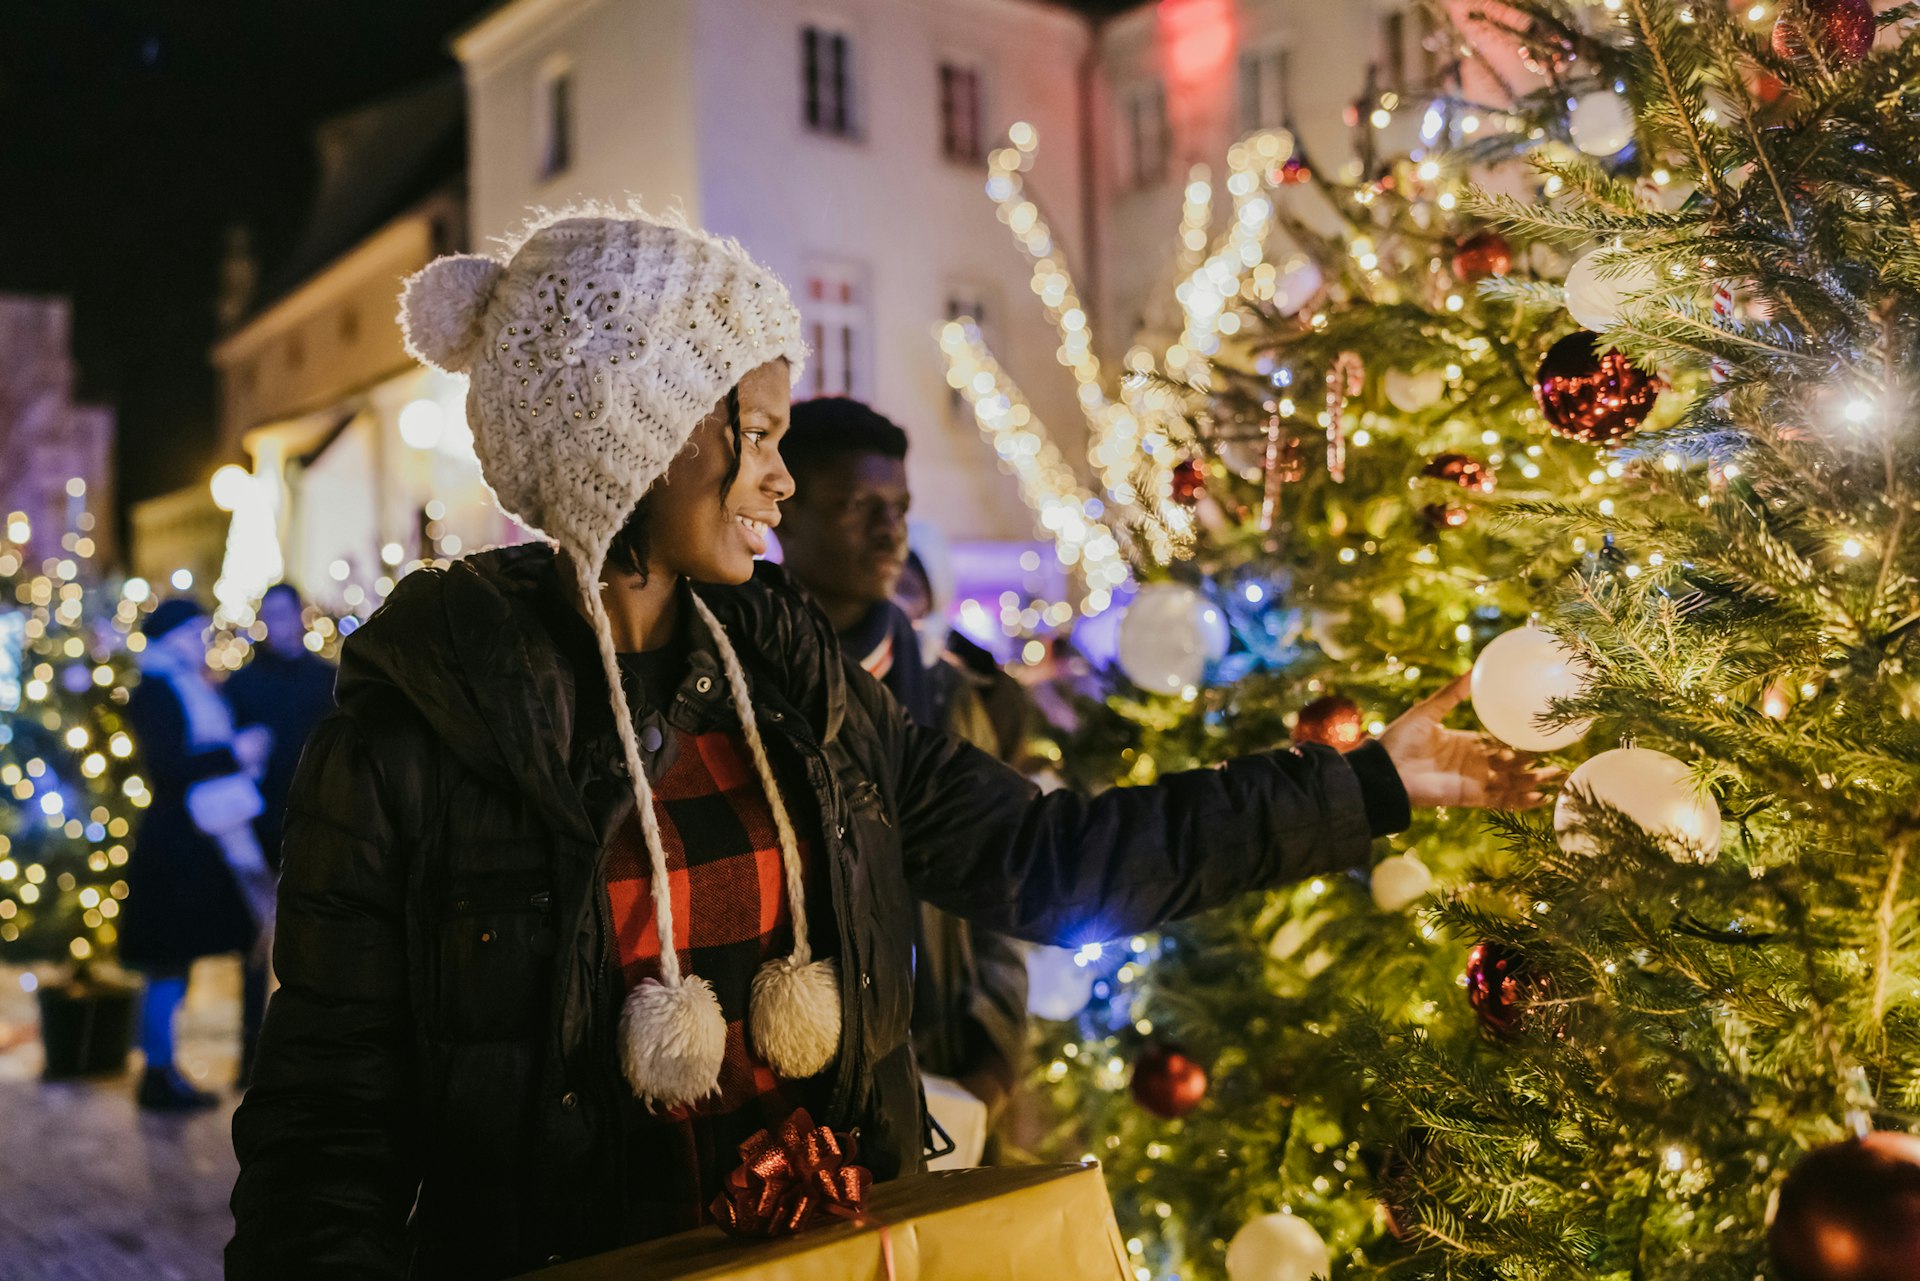 A woman looking at a Christmas tree in a festive market in Croatia